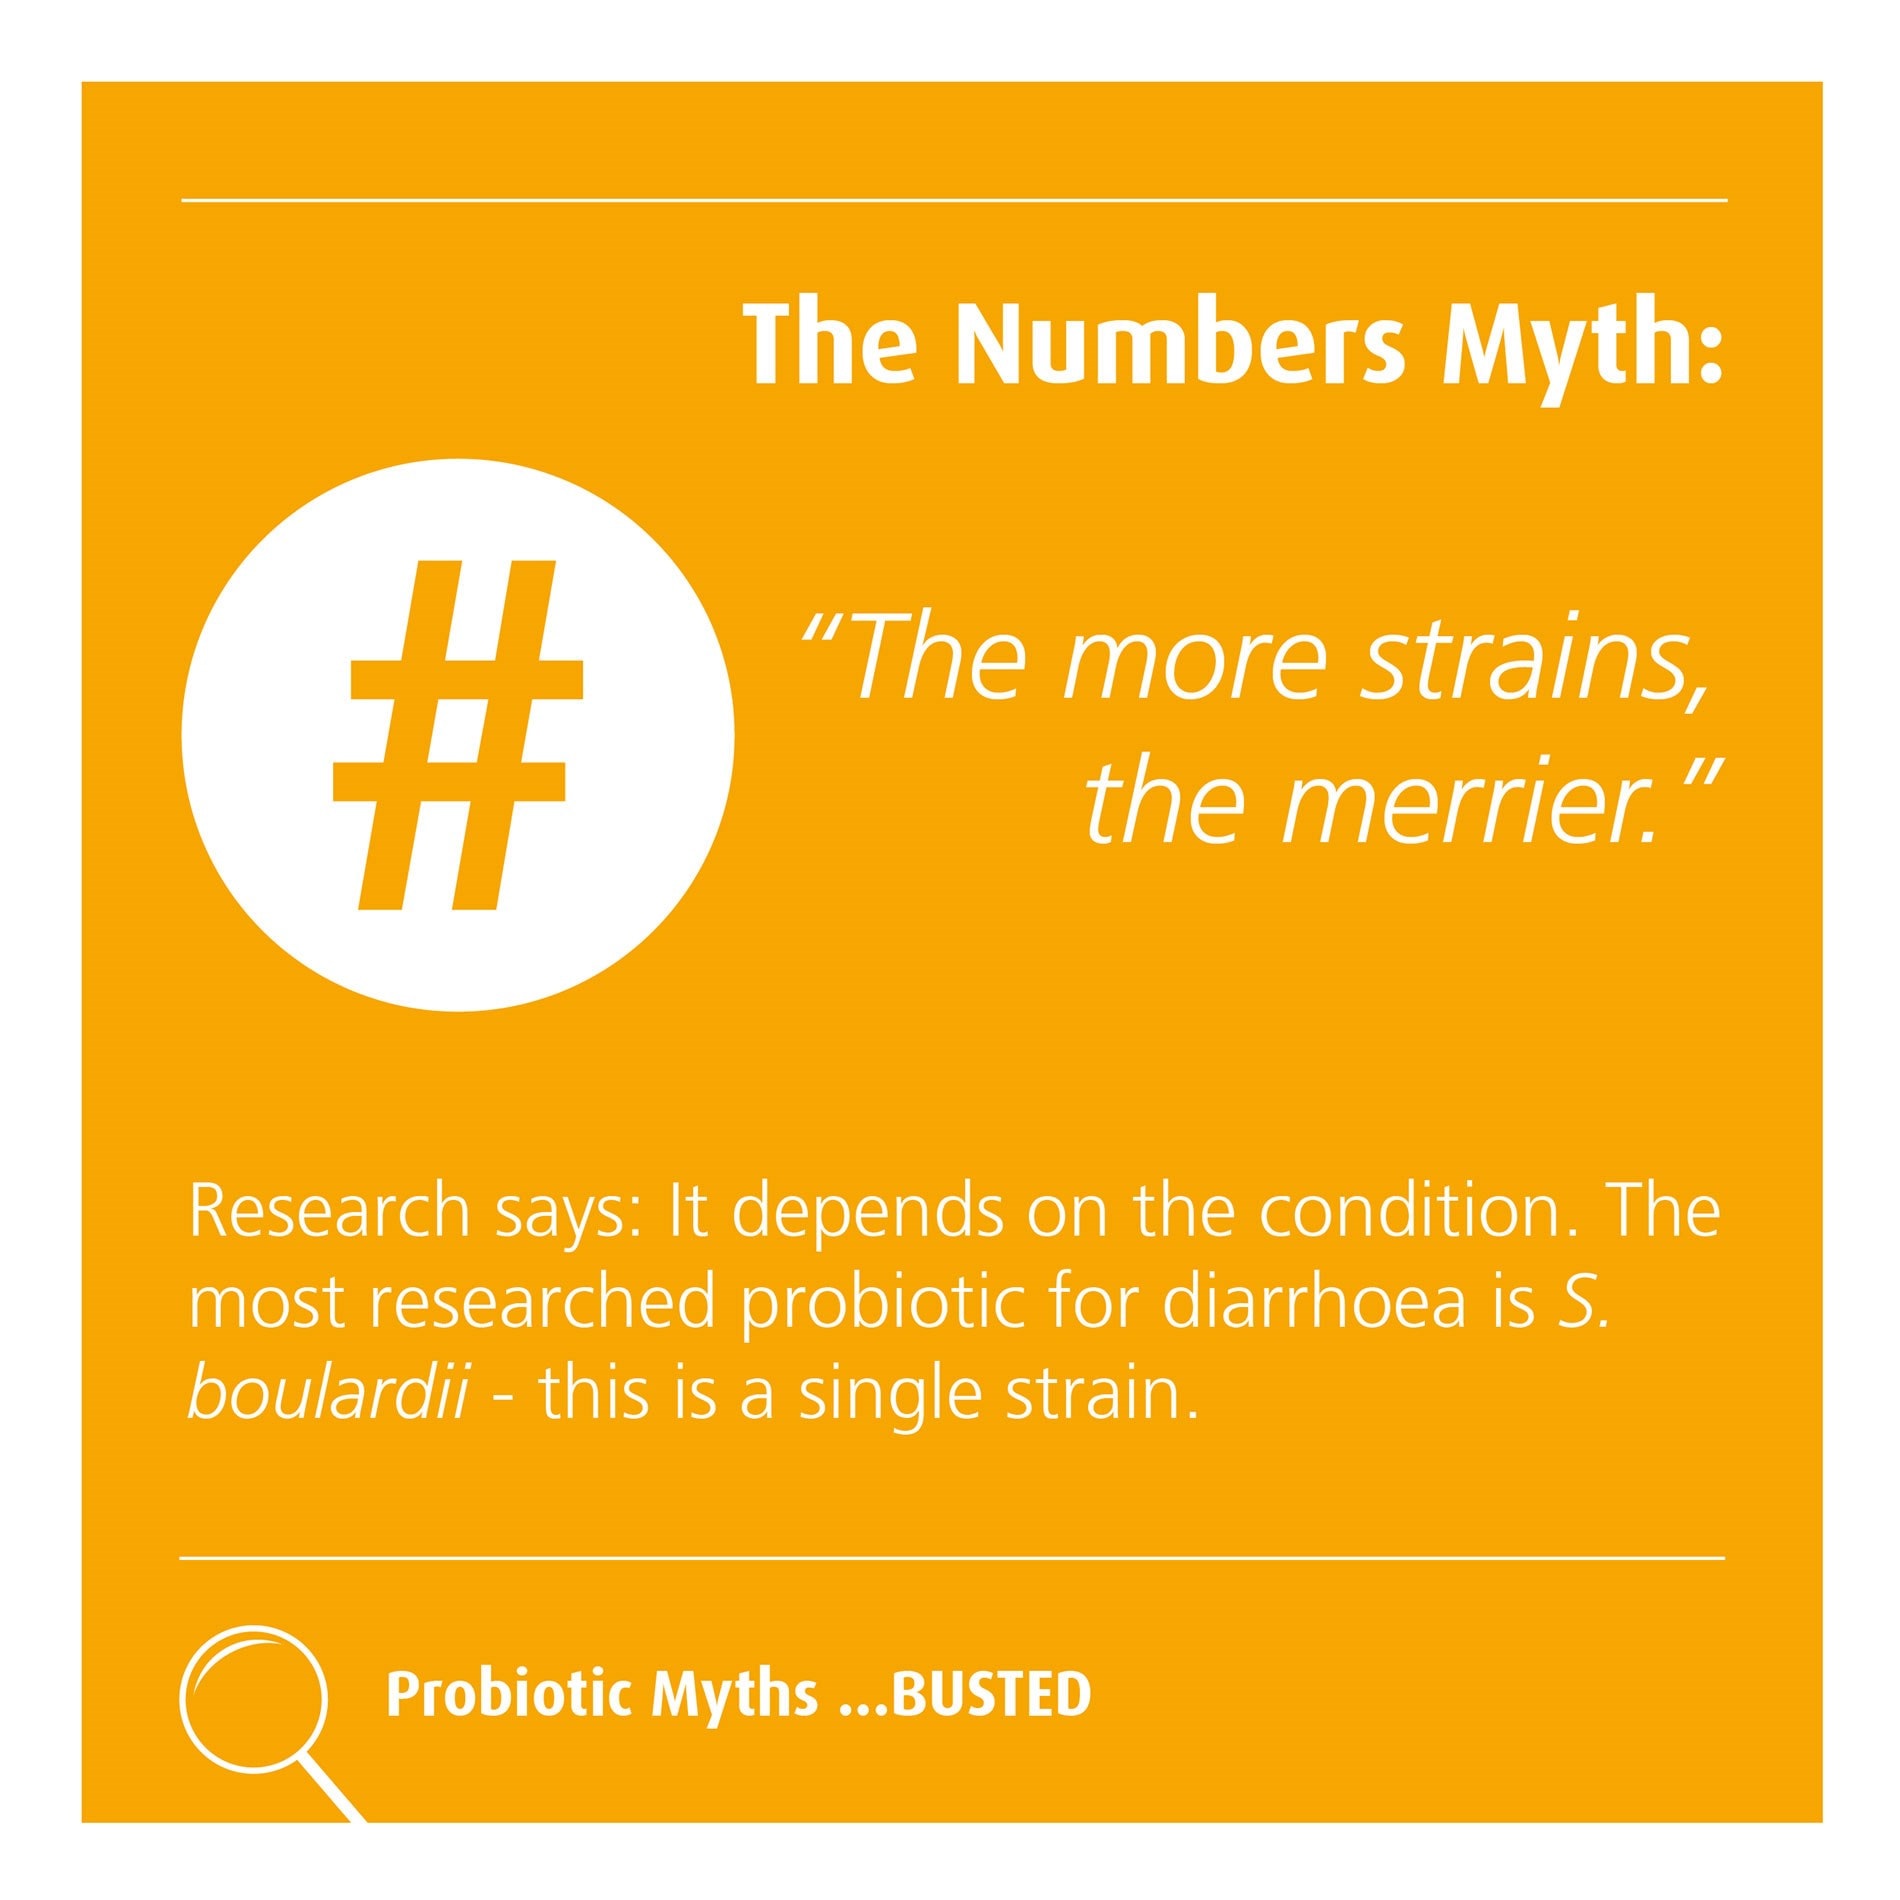 The number myth